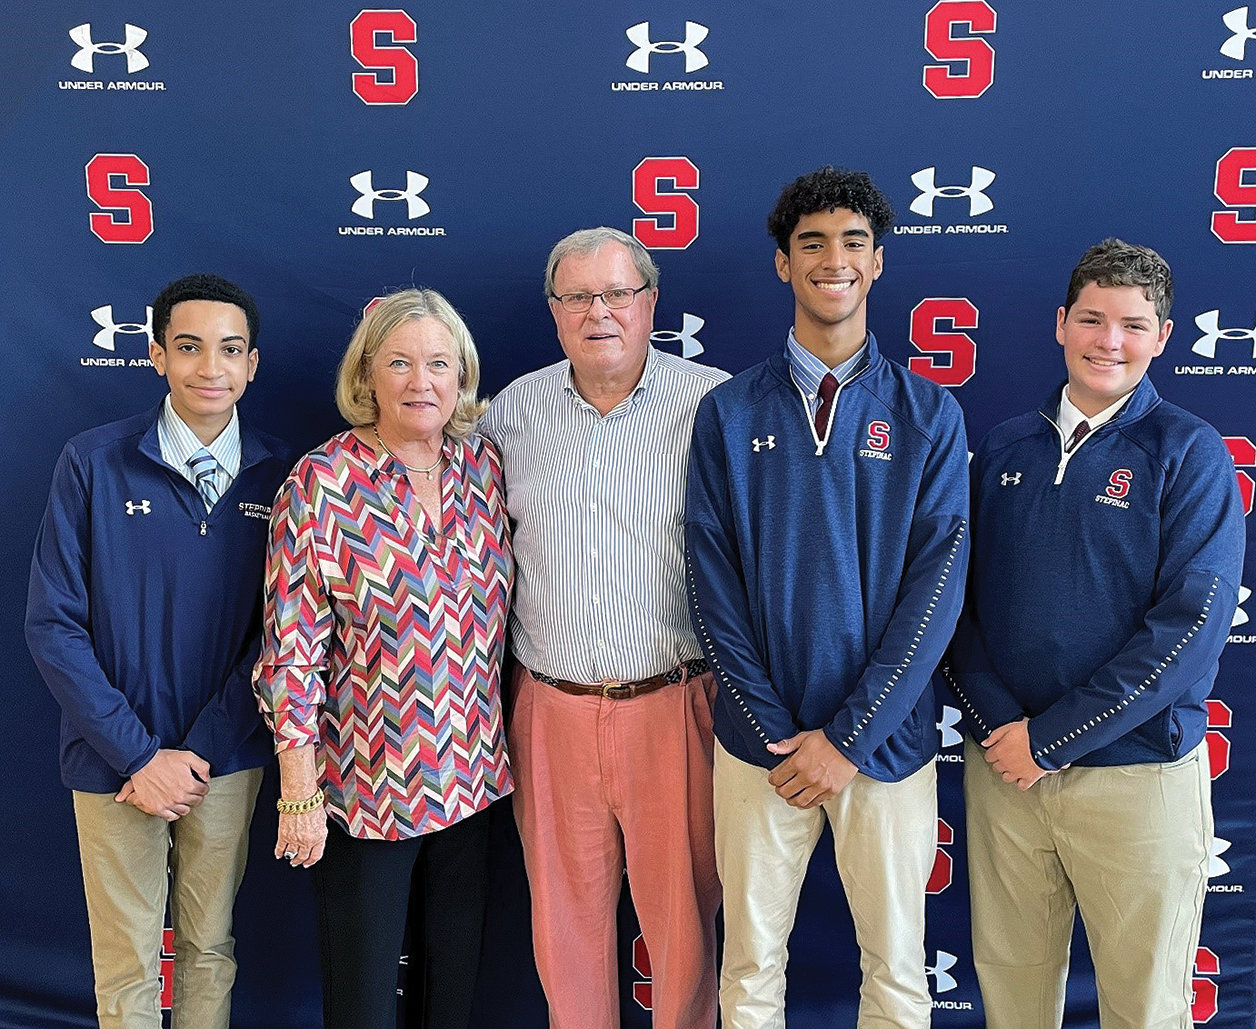 Susan and Dan Mahoney, center, met students from the Stepinac Honors Academy, from left, Calvin Lindo, Nathaniel Alvarez and Lachlan McIntyre at Archbishop Stepinac High School in White Plains. Dan Mahoney, a 1967 Stepinac graduate, and his wife donated $1 million to the school, which will rename its honors academy the Susan and Daniel P. Mahoney Honors Academy.